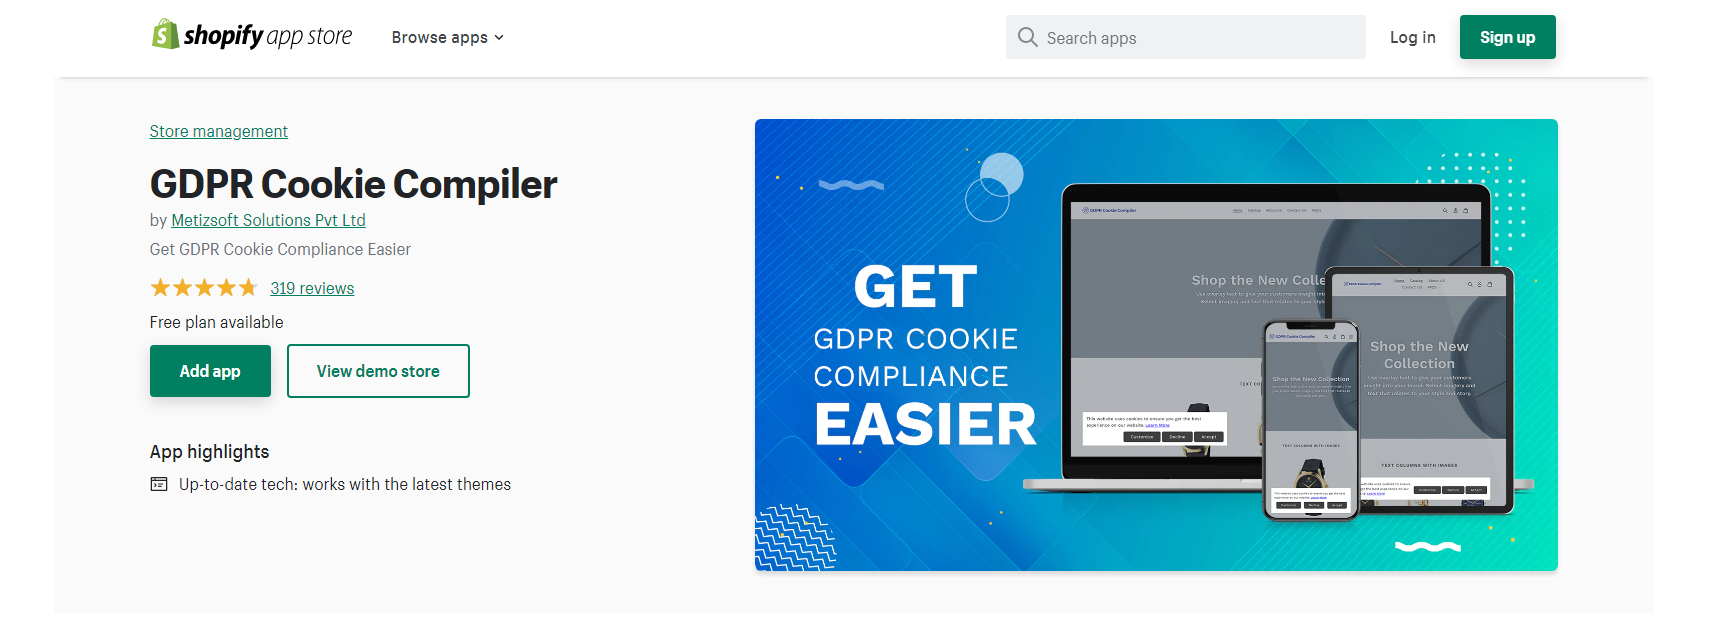 GDPR cookie Compiler - Shopify cookie apps